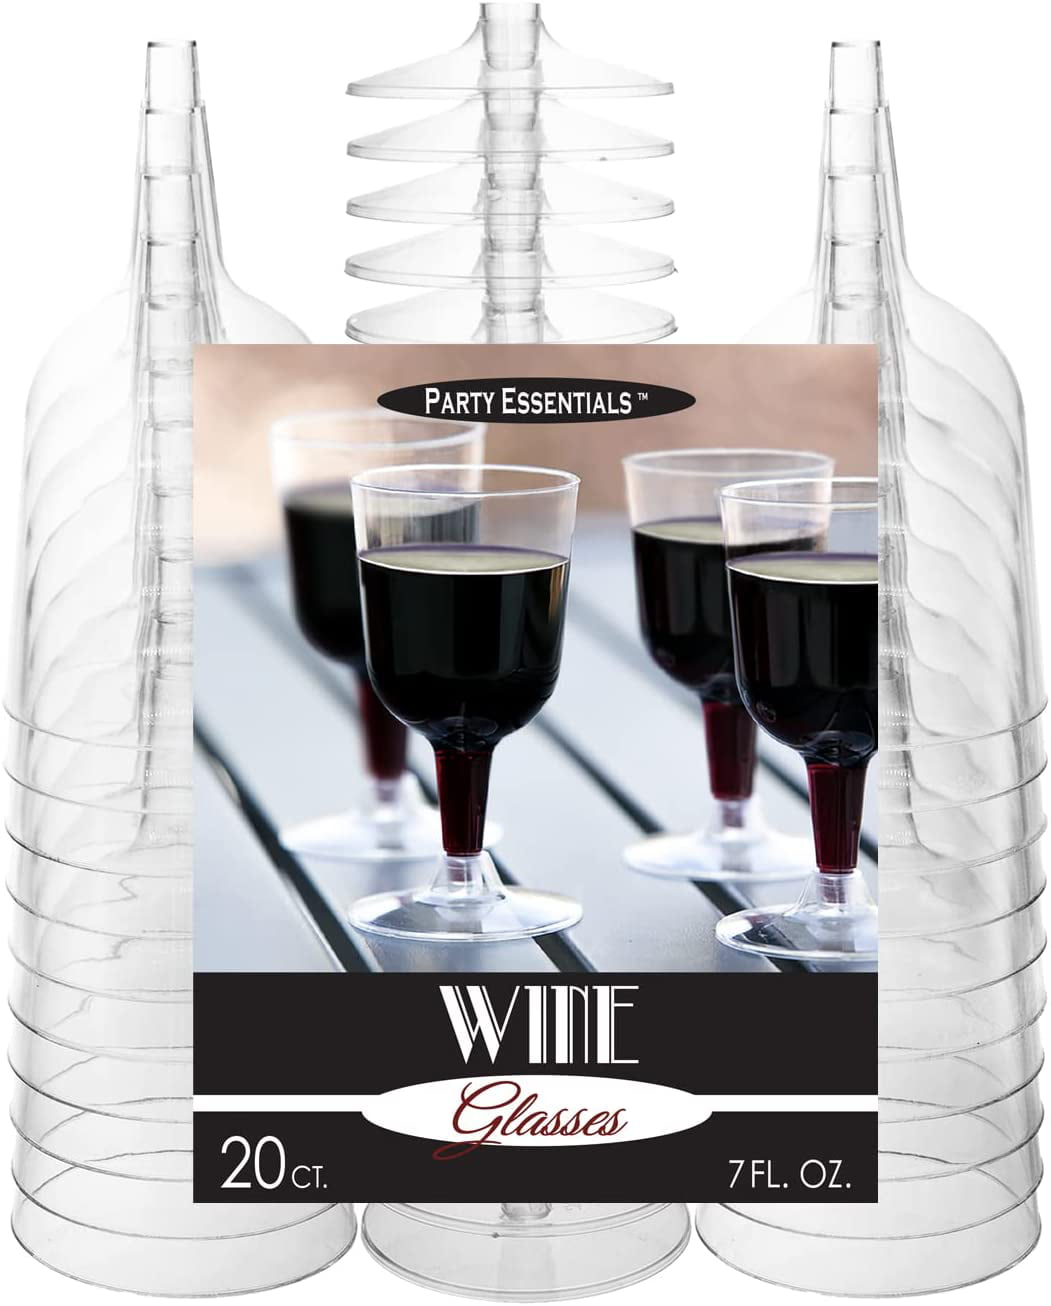 Visions 5 oz. Heavy Weight Clear 2-Piece Plastic Wine Goblet - 20/Pack